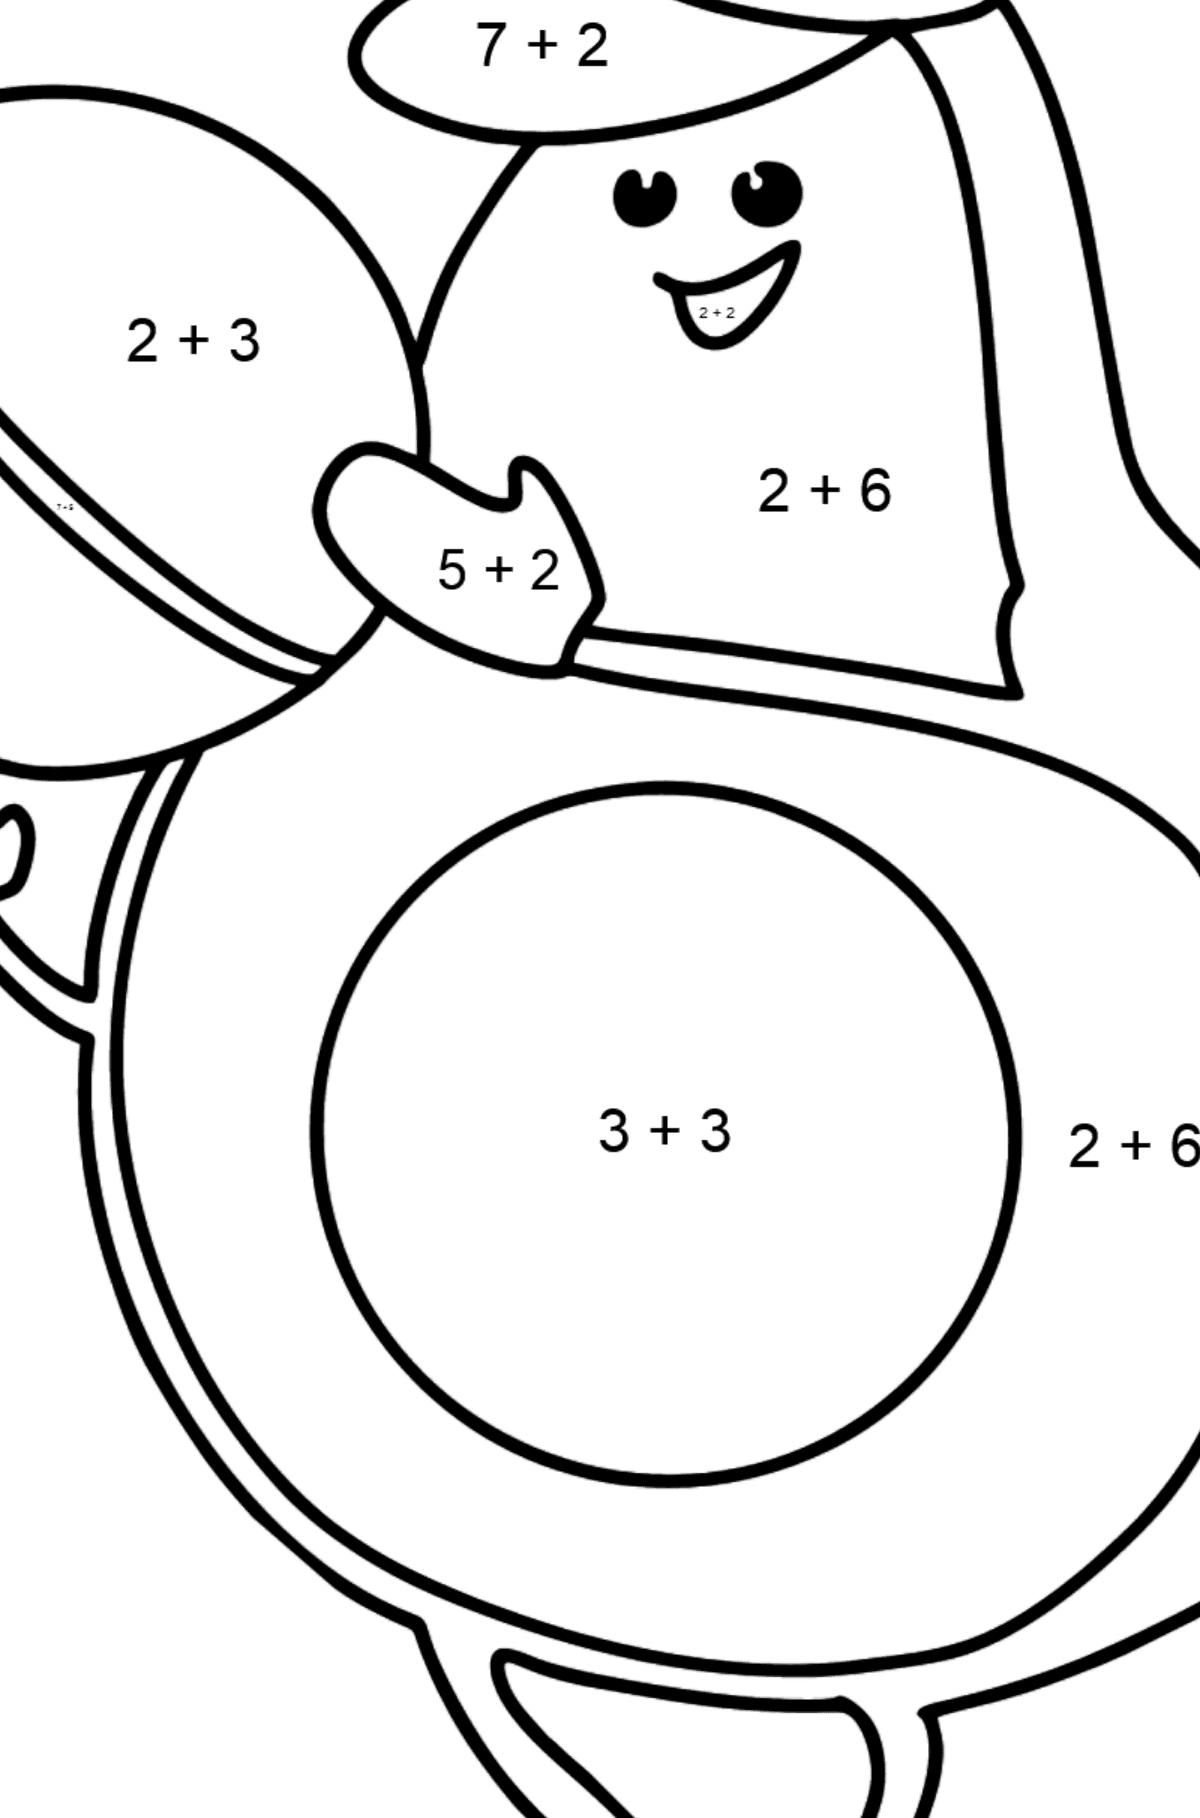 Avocado Plays Football coloring page - Math Coloring - Addition for Kids